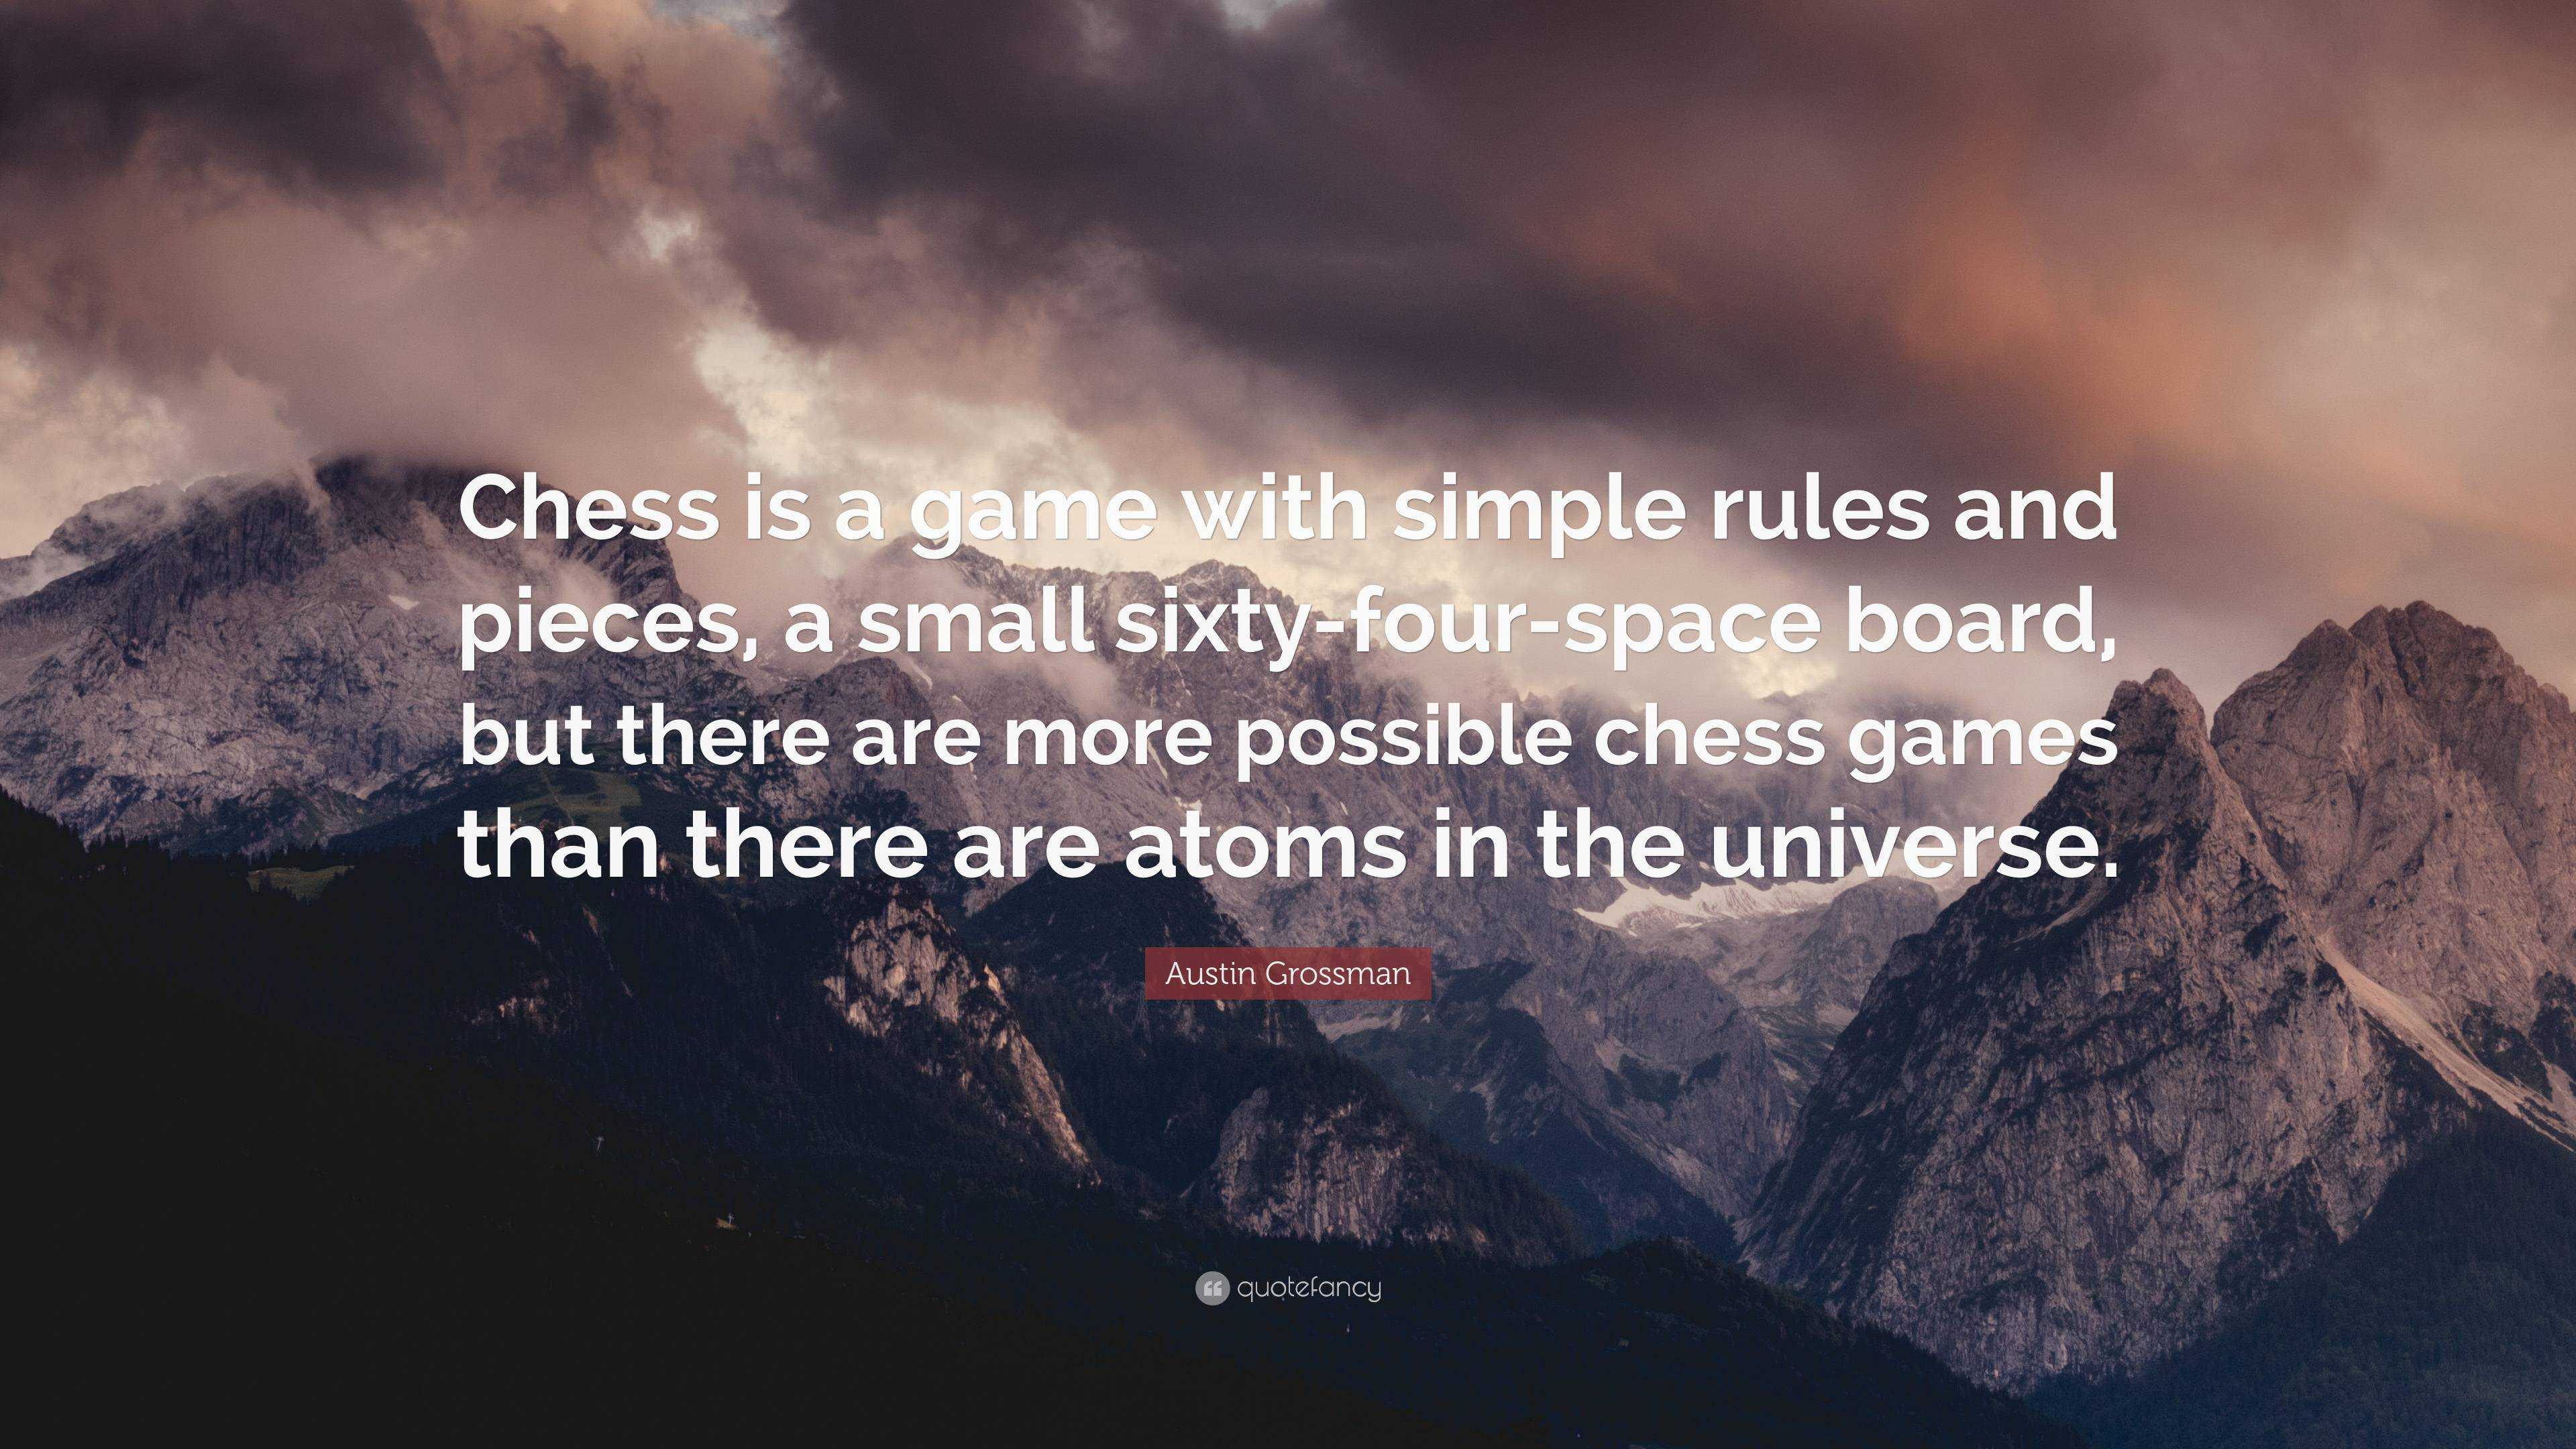 Fact of the Day : There are more possible iterations of a game of chess  than there are atoms in the known universe. Visit…